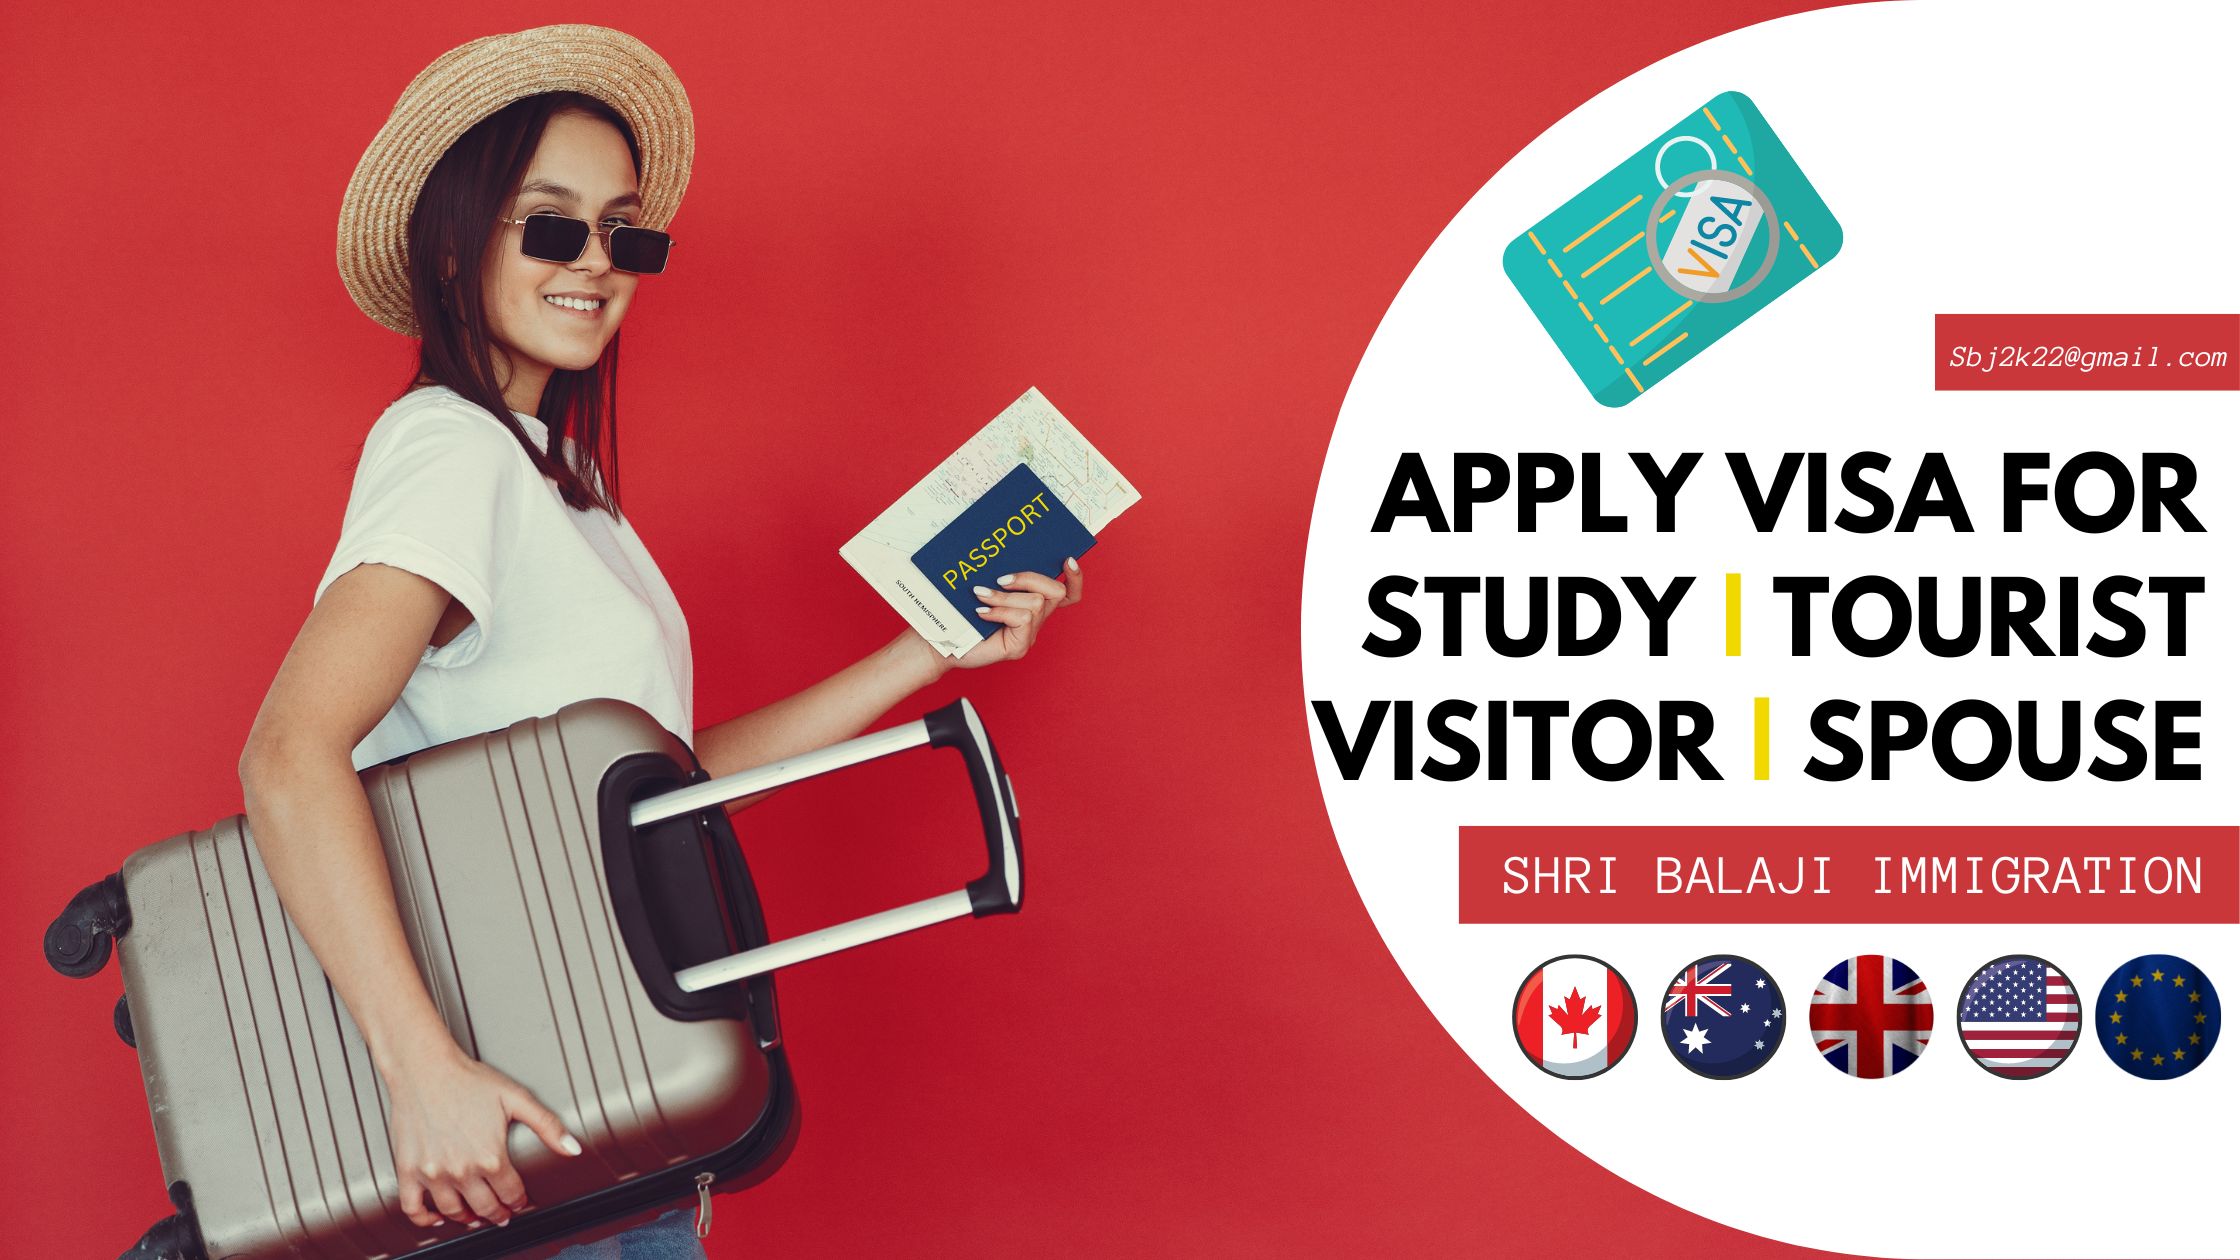 apply visa FOR STUDY TOURIST VISITOR SPOUSE